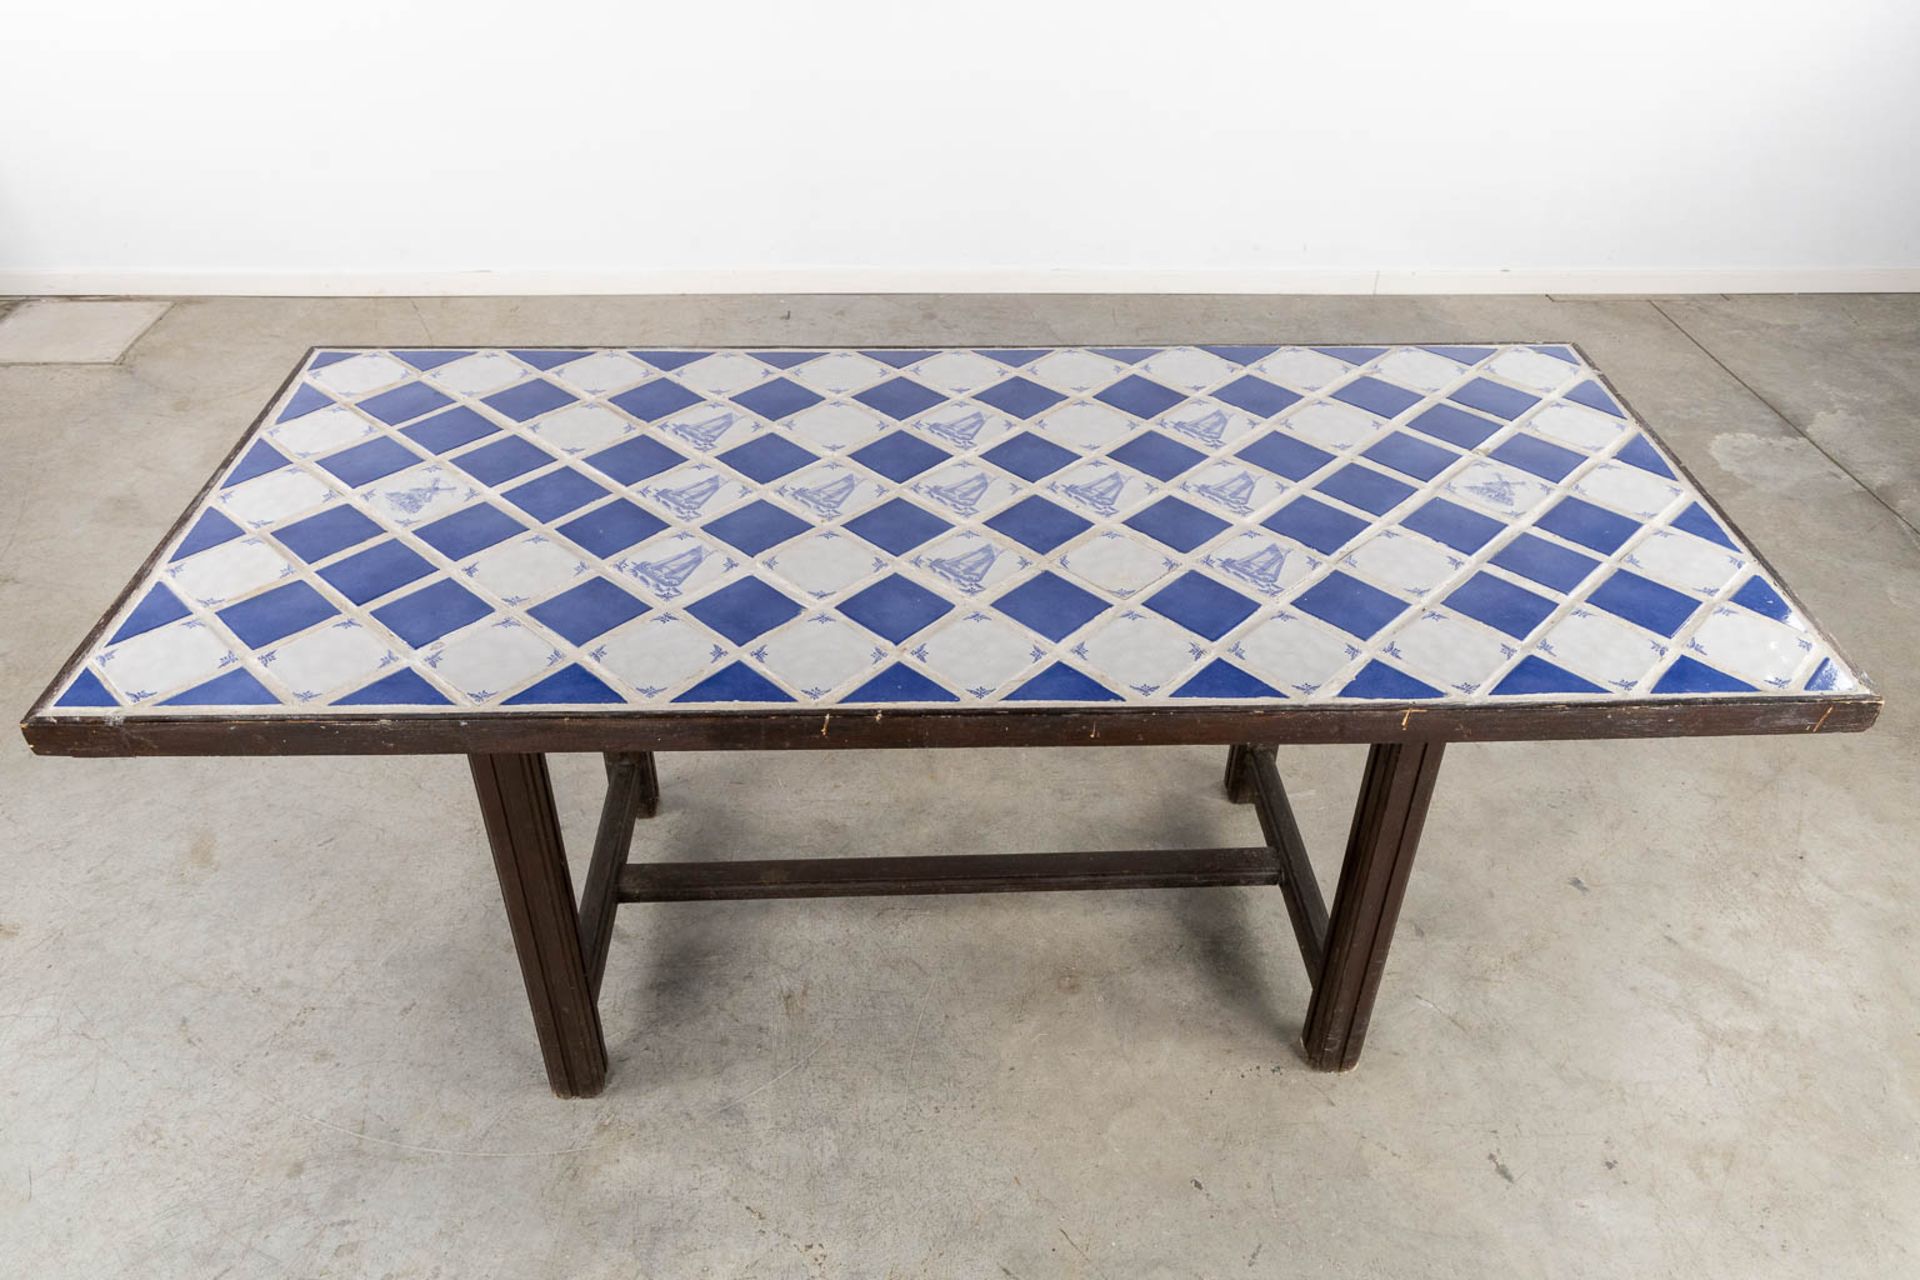 A Spanish table, finished with white and blue tiles. (L:85 x W:184 x H:76 cm) - Image 7 of 11